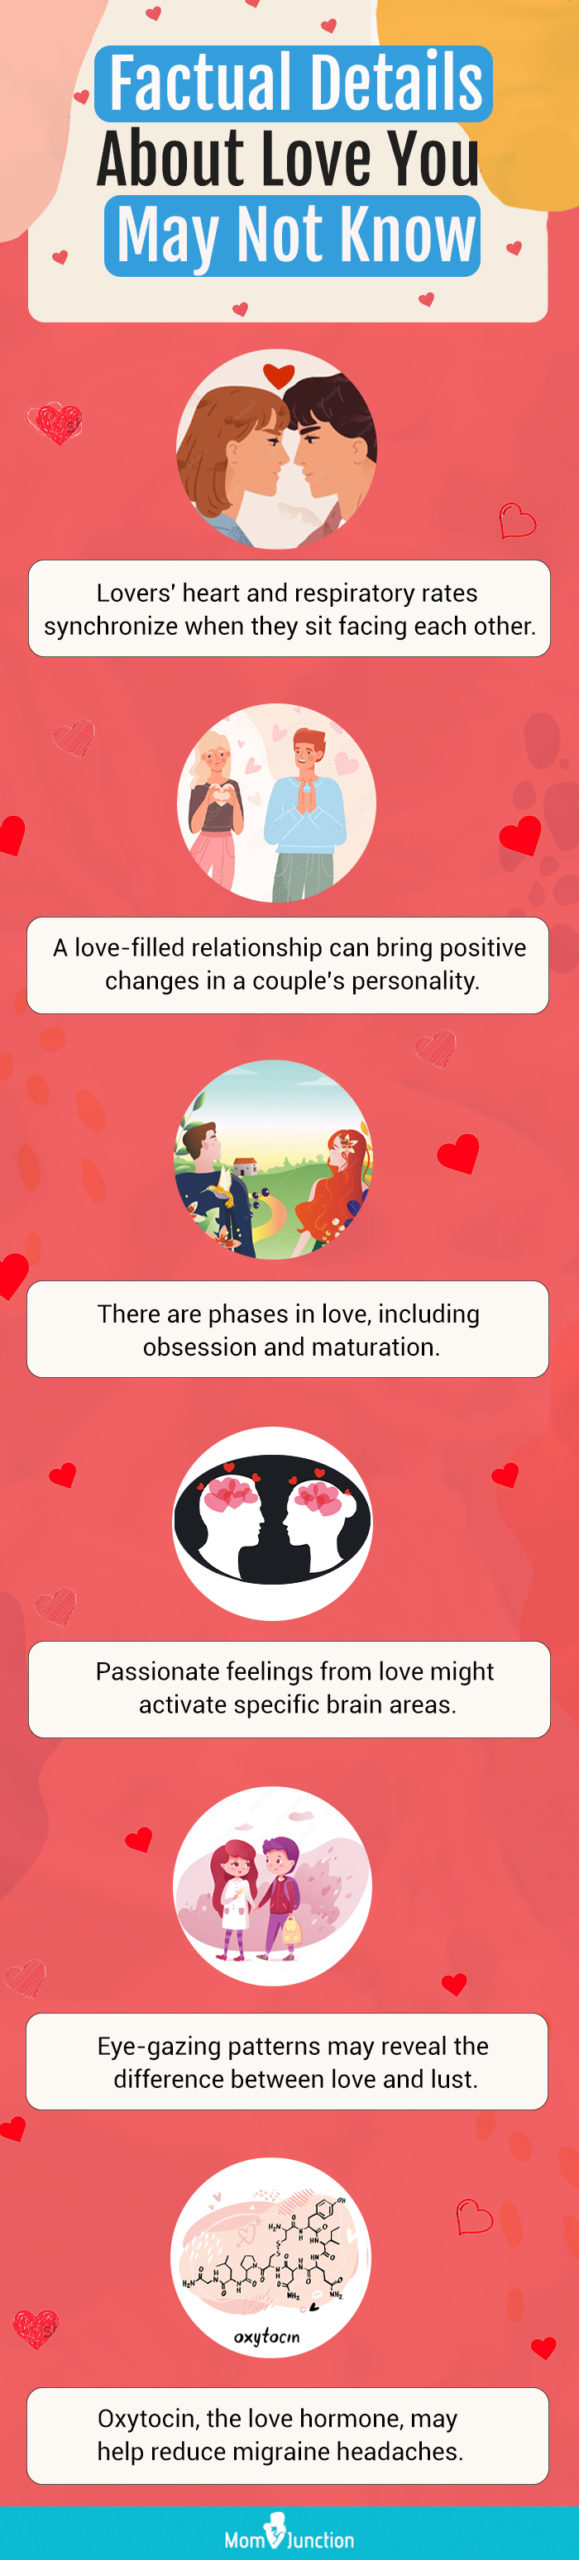 fun facts about love and relationships